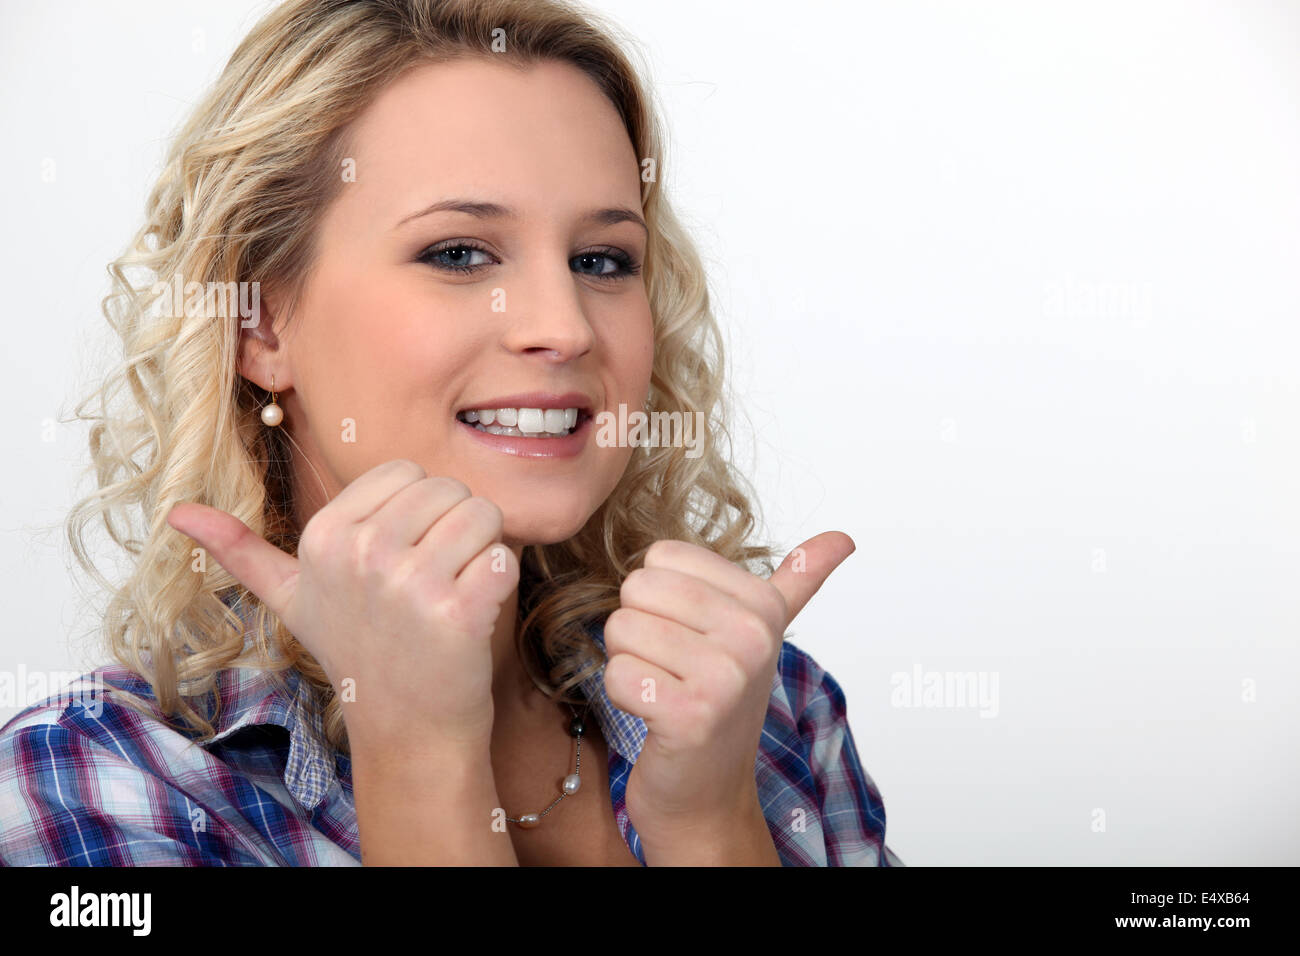 blond woman doing thumbs-up gesture Stock Photo